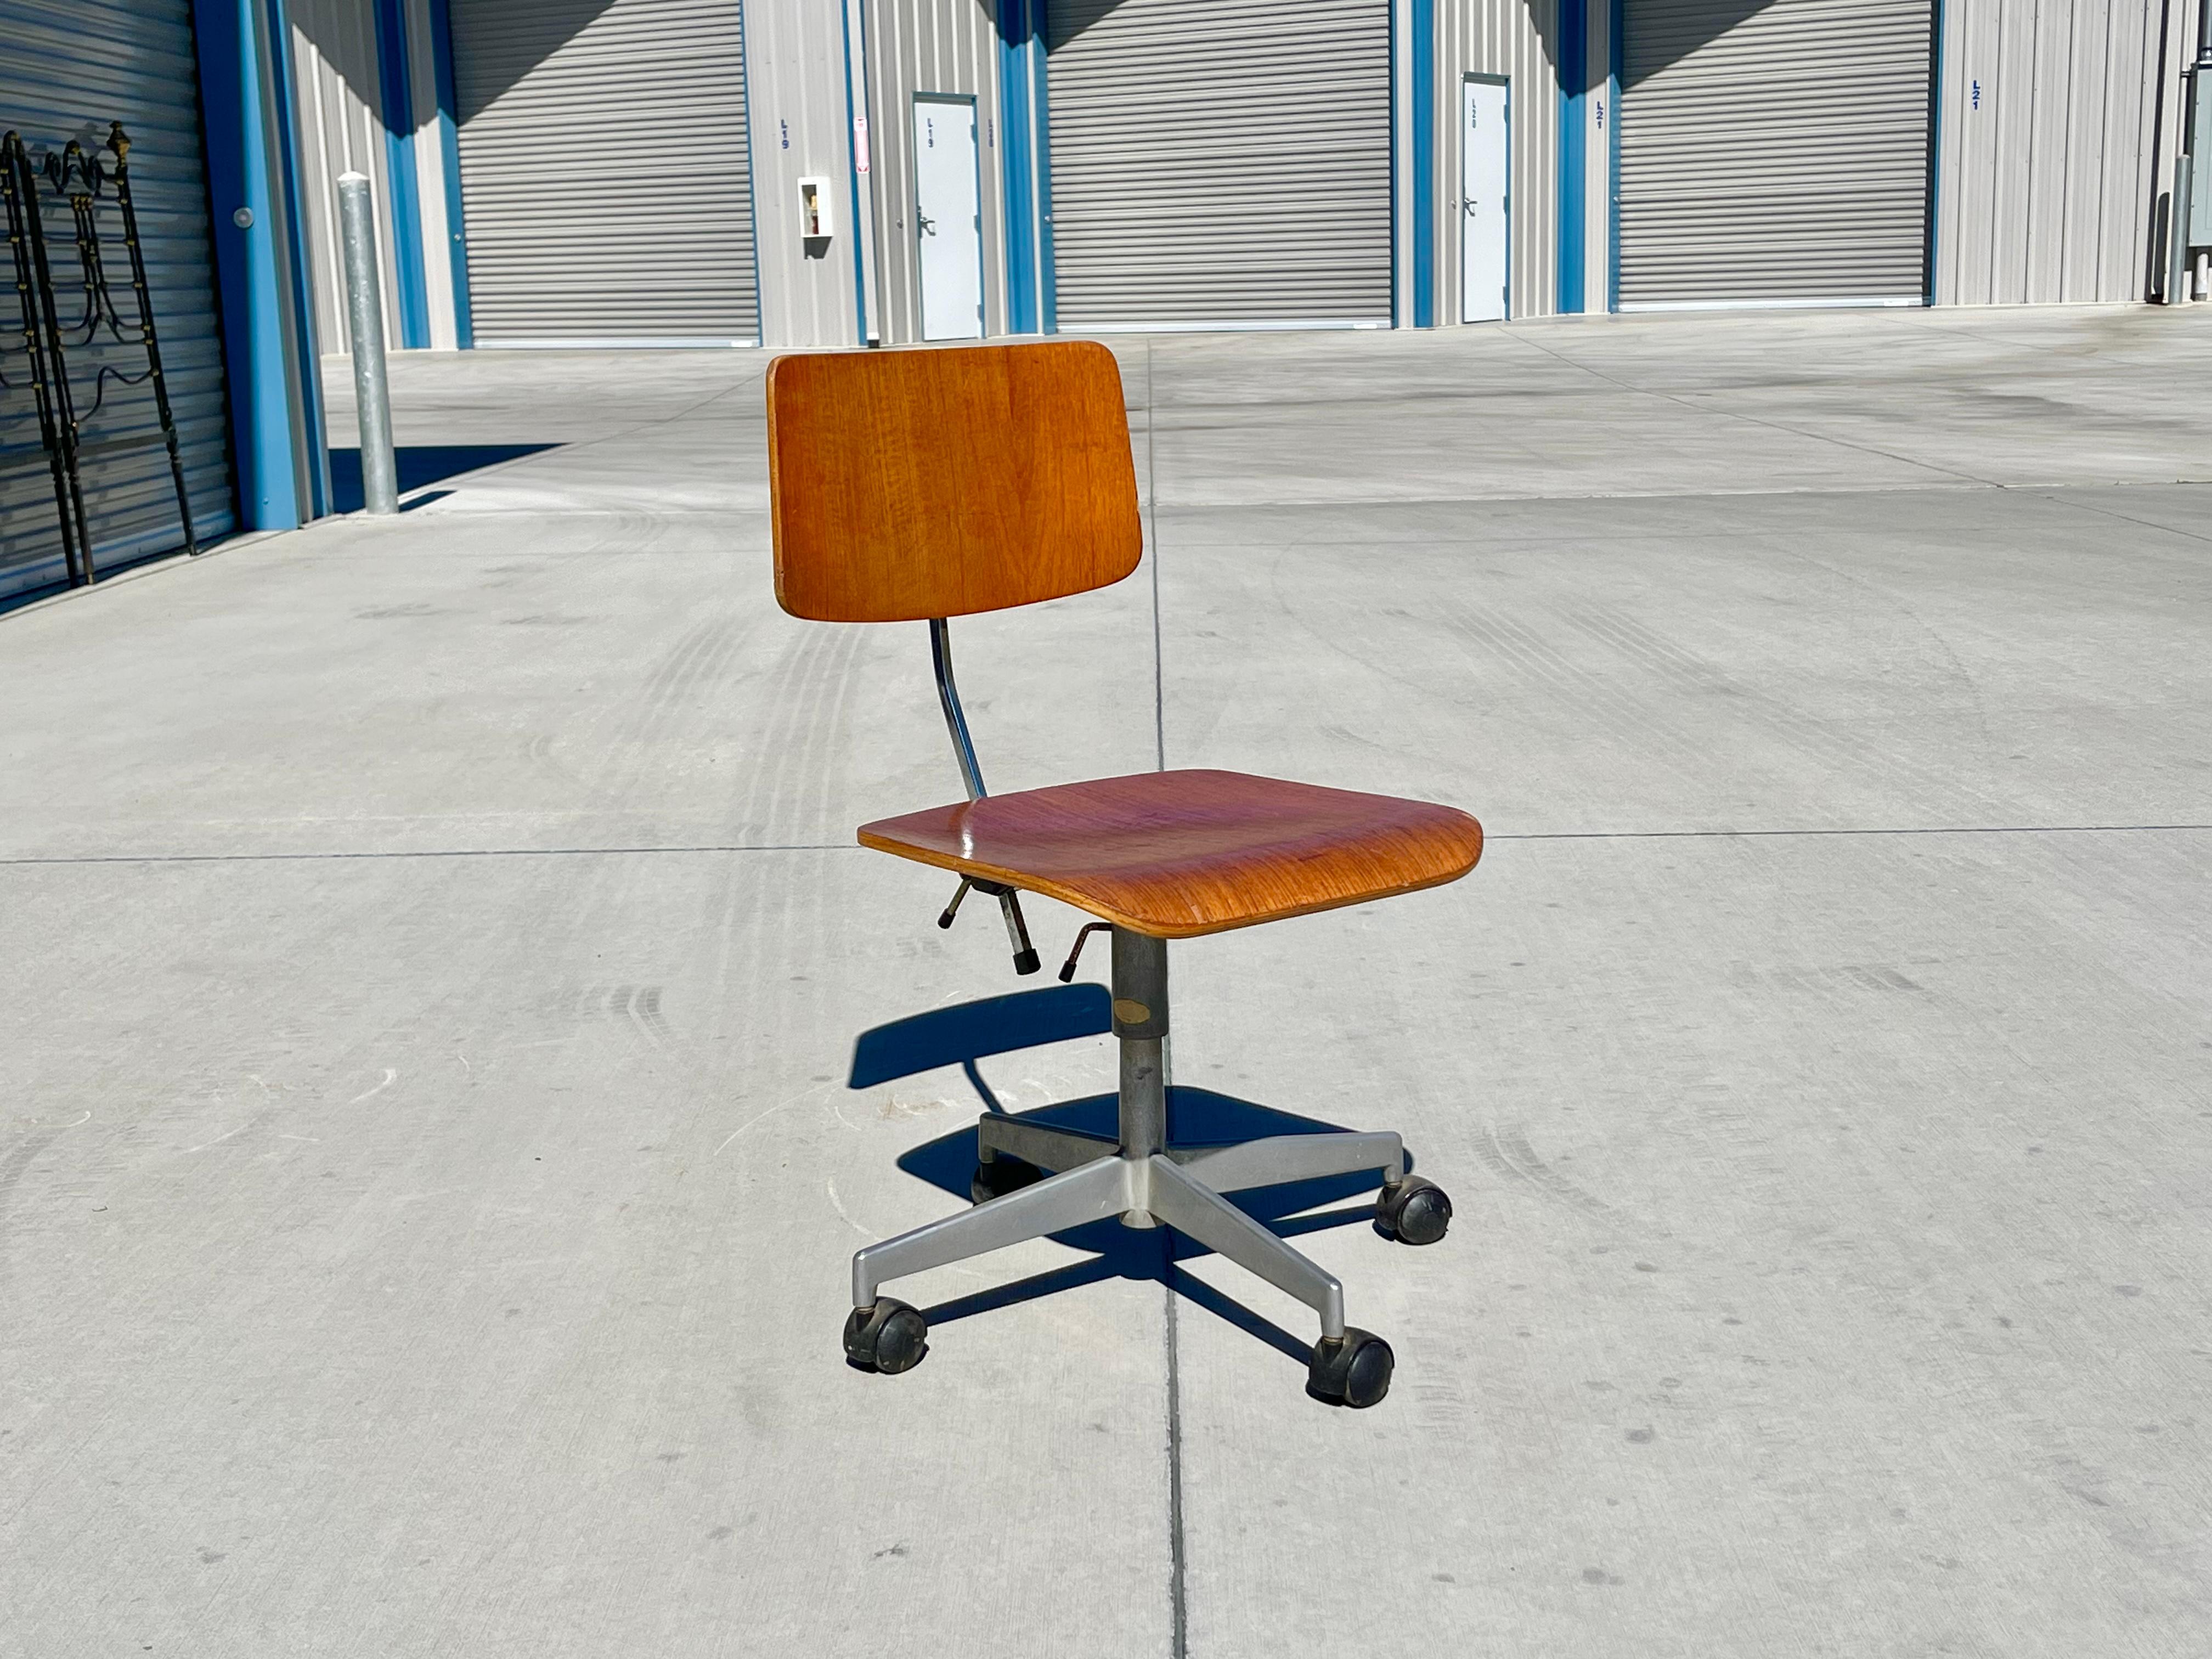 Danish 1950s Mid Century Modern Office Chair by Jorge Rasmussen For Sale